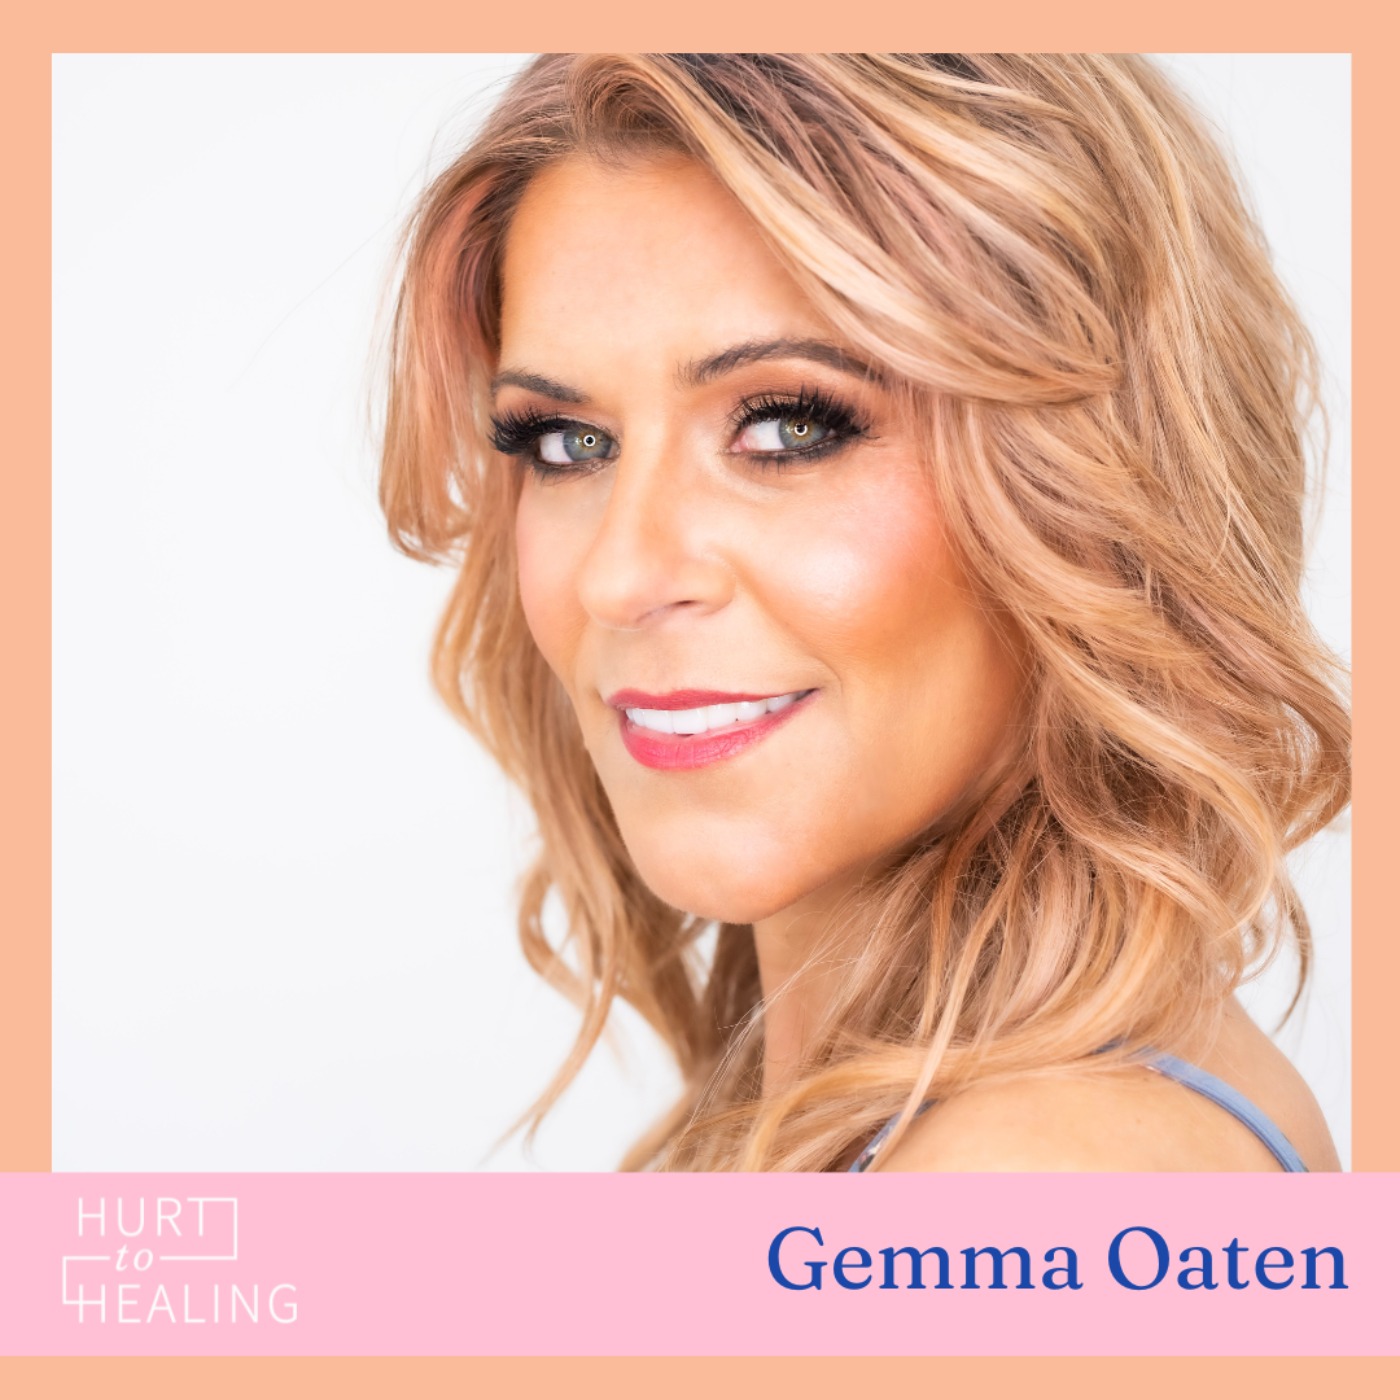 Gemma Oaten on Relationships, Eating Disorders, and Self-Acceptance